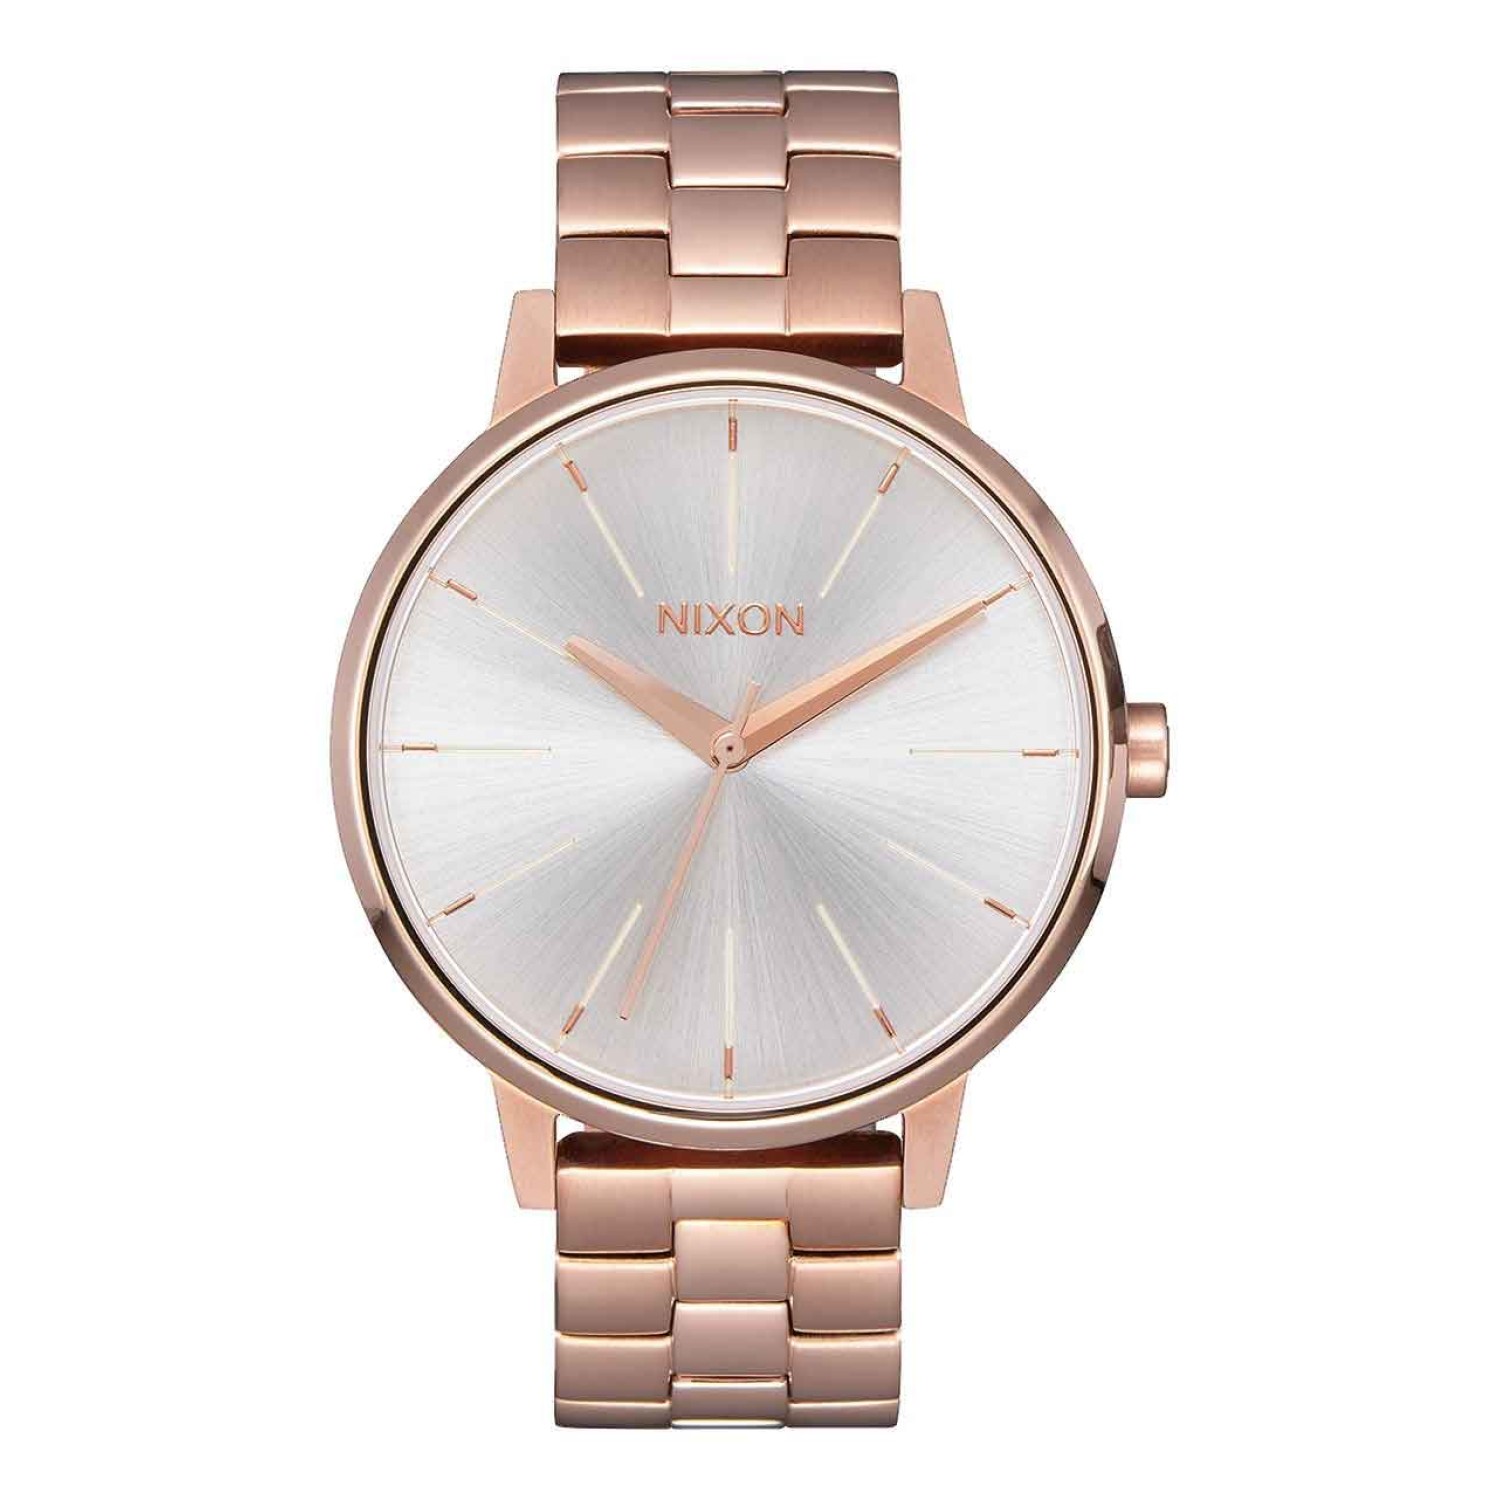 A099-1045-00 NIXON Womens Kensington Watch. Clean and simple design language, an updated take on heirloom styles. Vintage inspired classic 37mm case size in a clean look that’s suitable for any setting2 Year  Guarantee Humm -Buy Little things up to $1000 